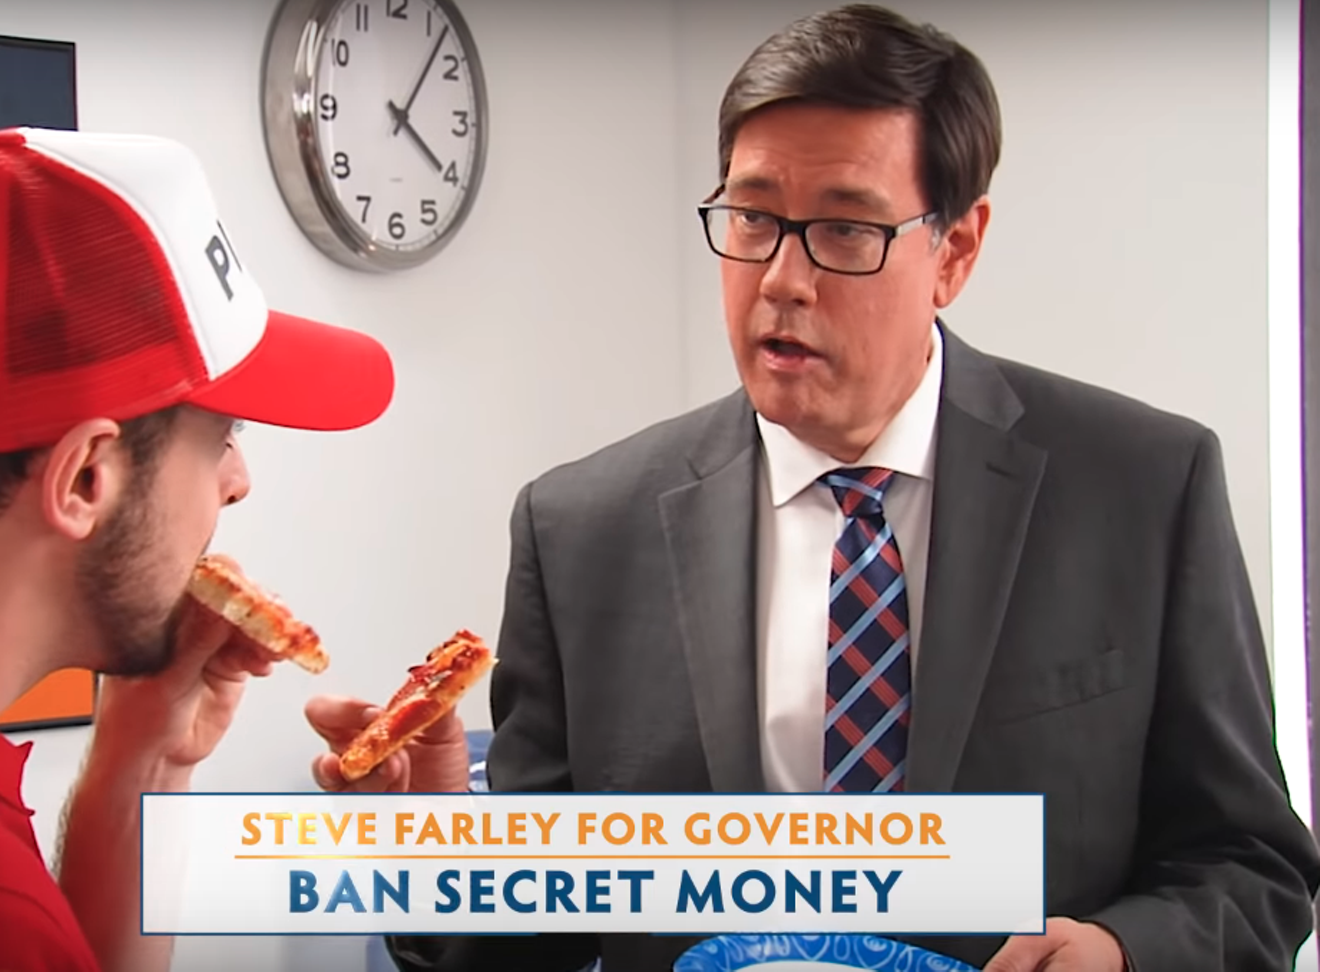 State Senator Steve Farley delivers policy briefs over pizza, according to this campaign ad.